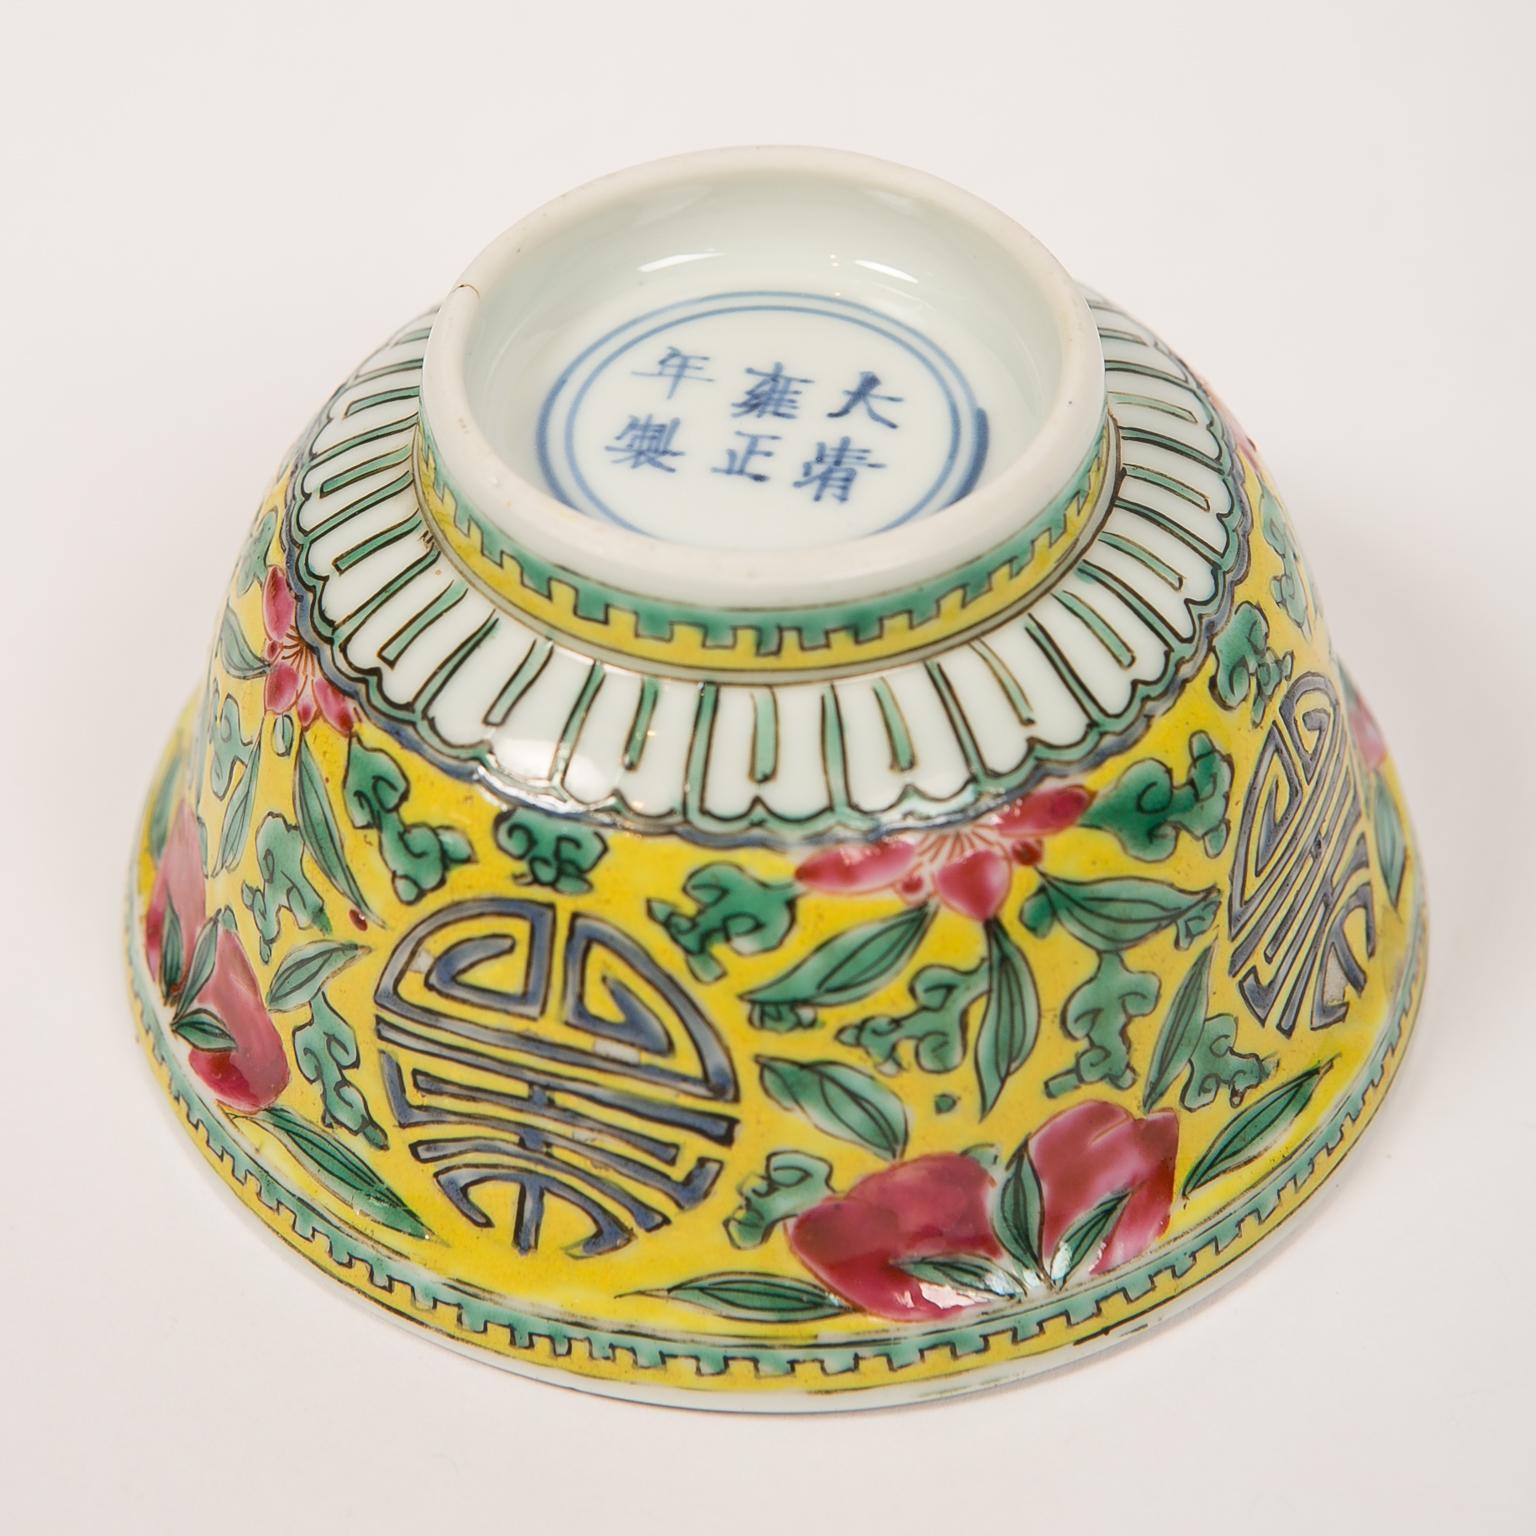 Enameled Qing Chinese Porcelain Bowl with 